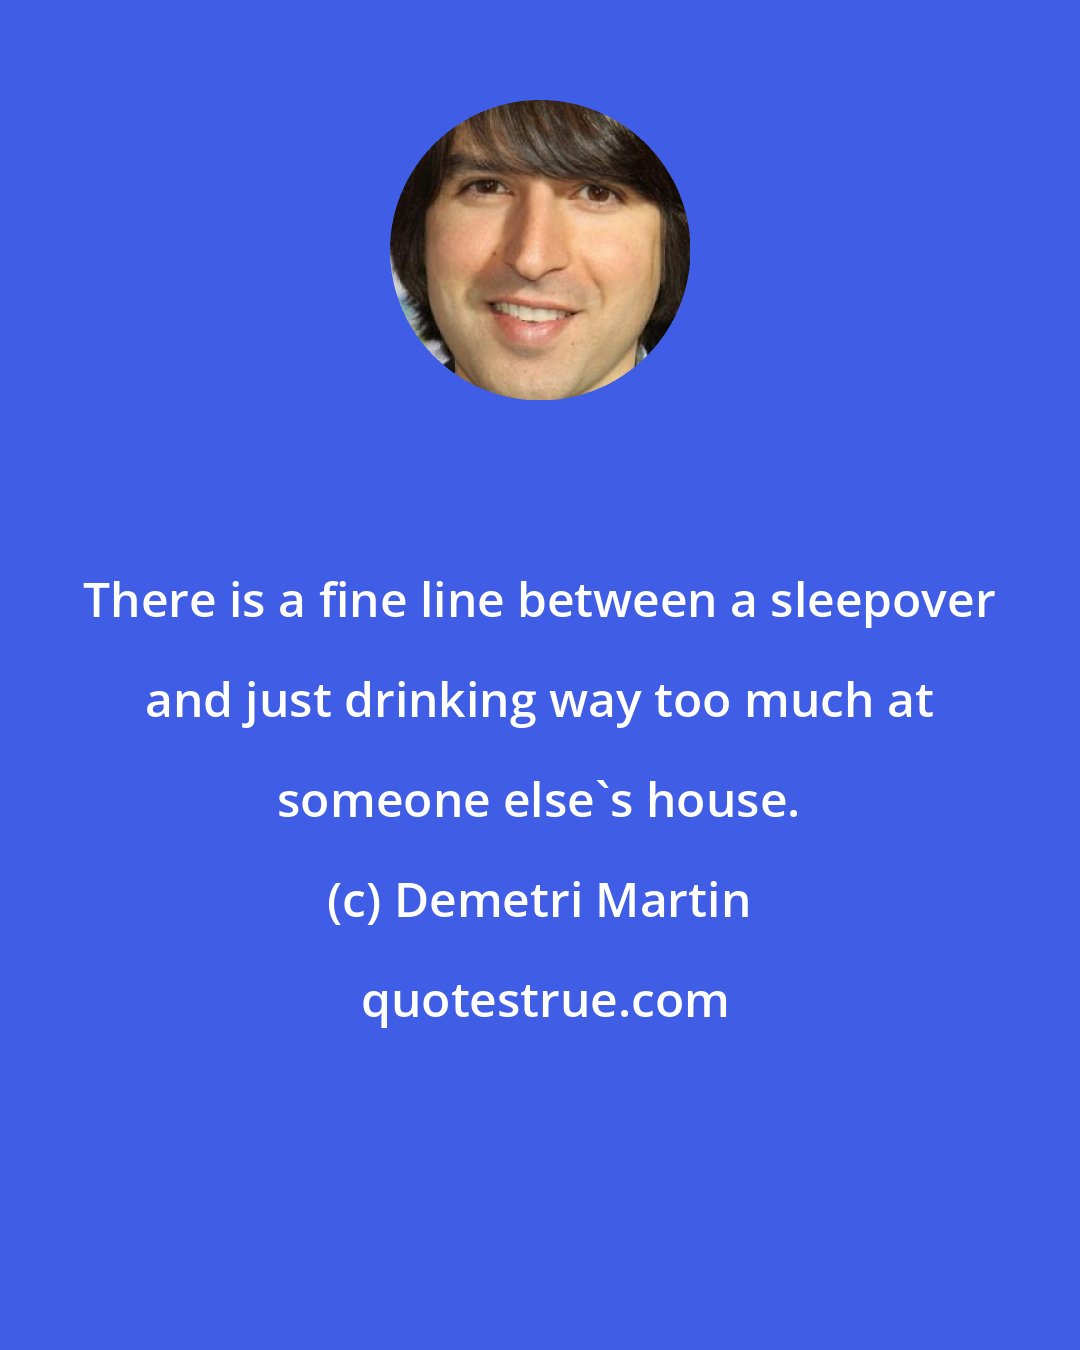 Demetri Martin: There is a fine line between a sleepover and just drinking way too much at someone else's house.